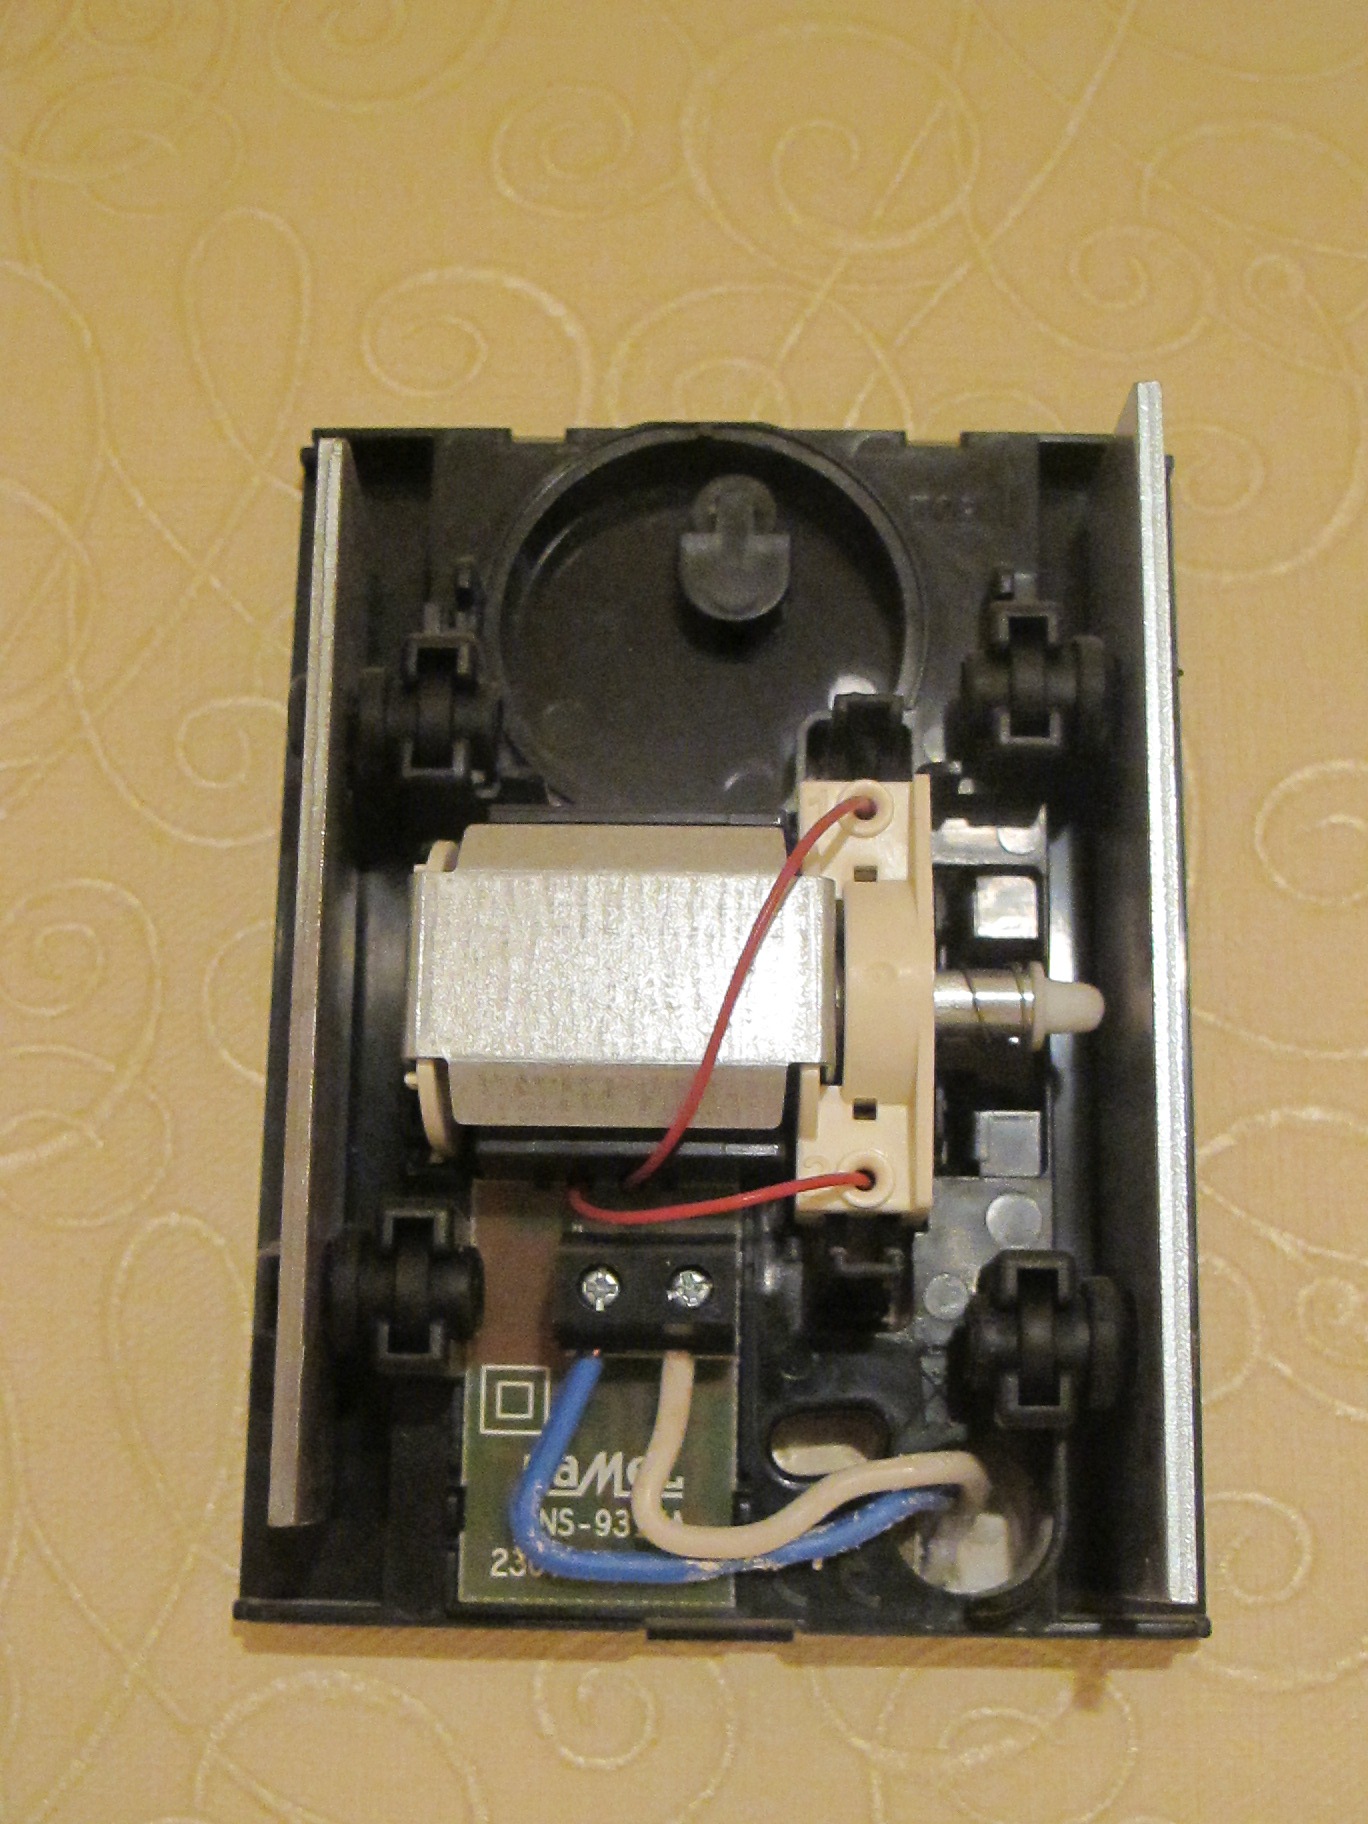 How to power a Wi-Fi router from an electric door bell?